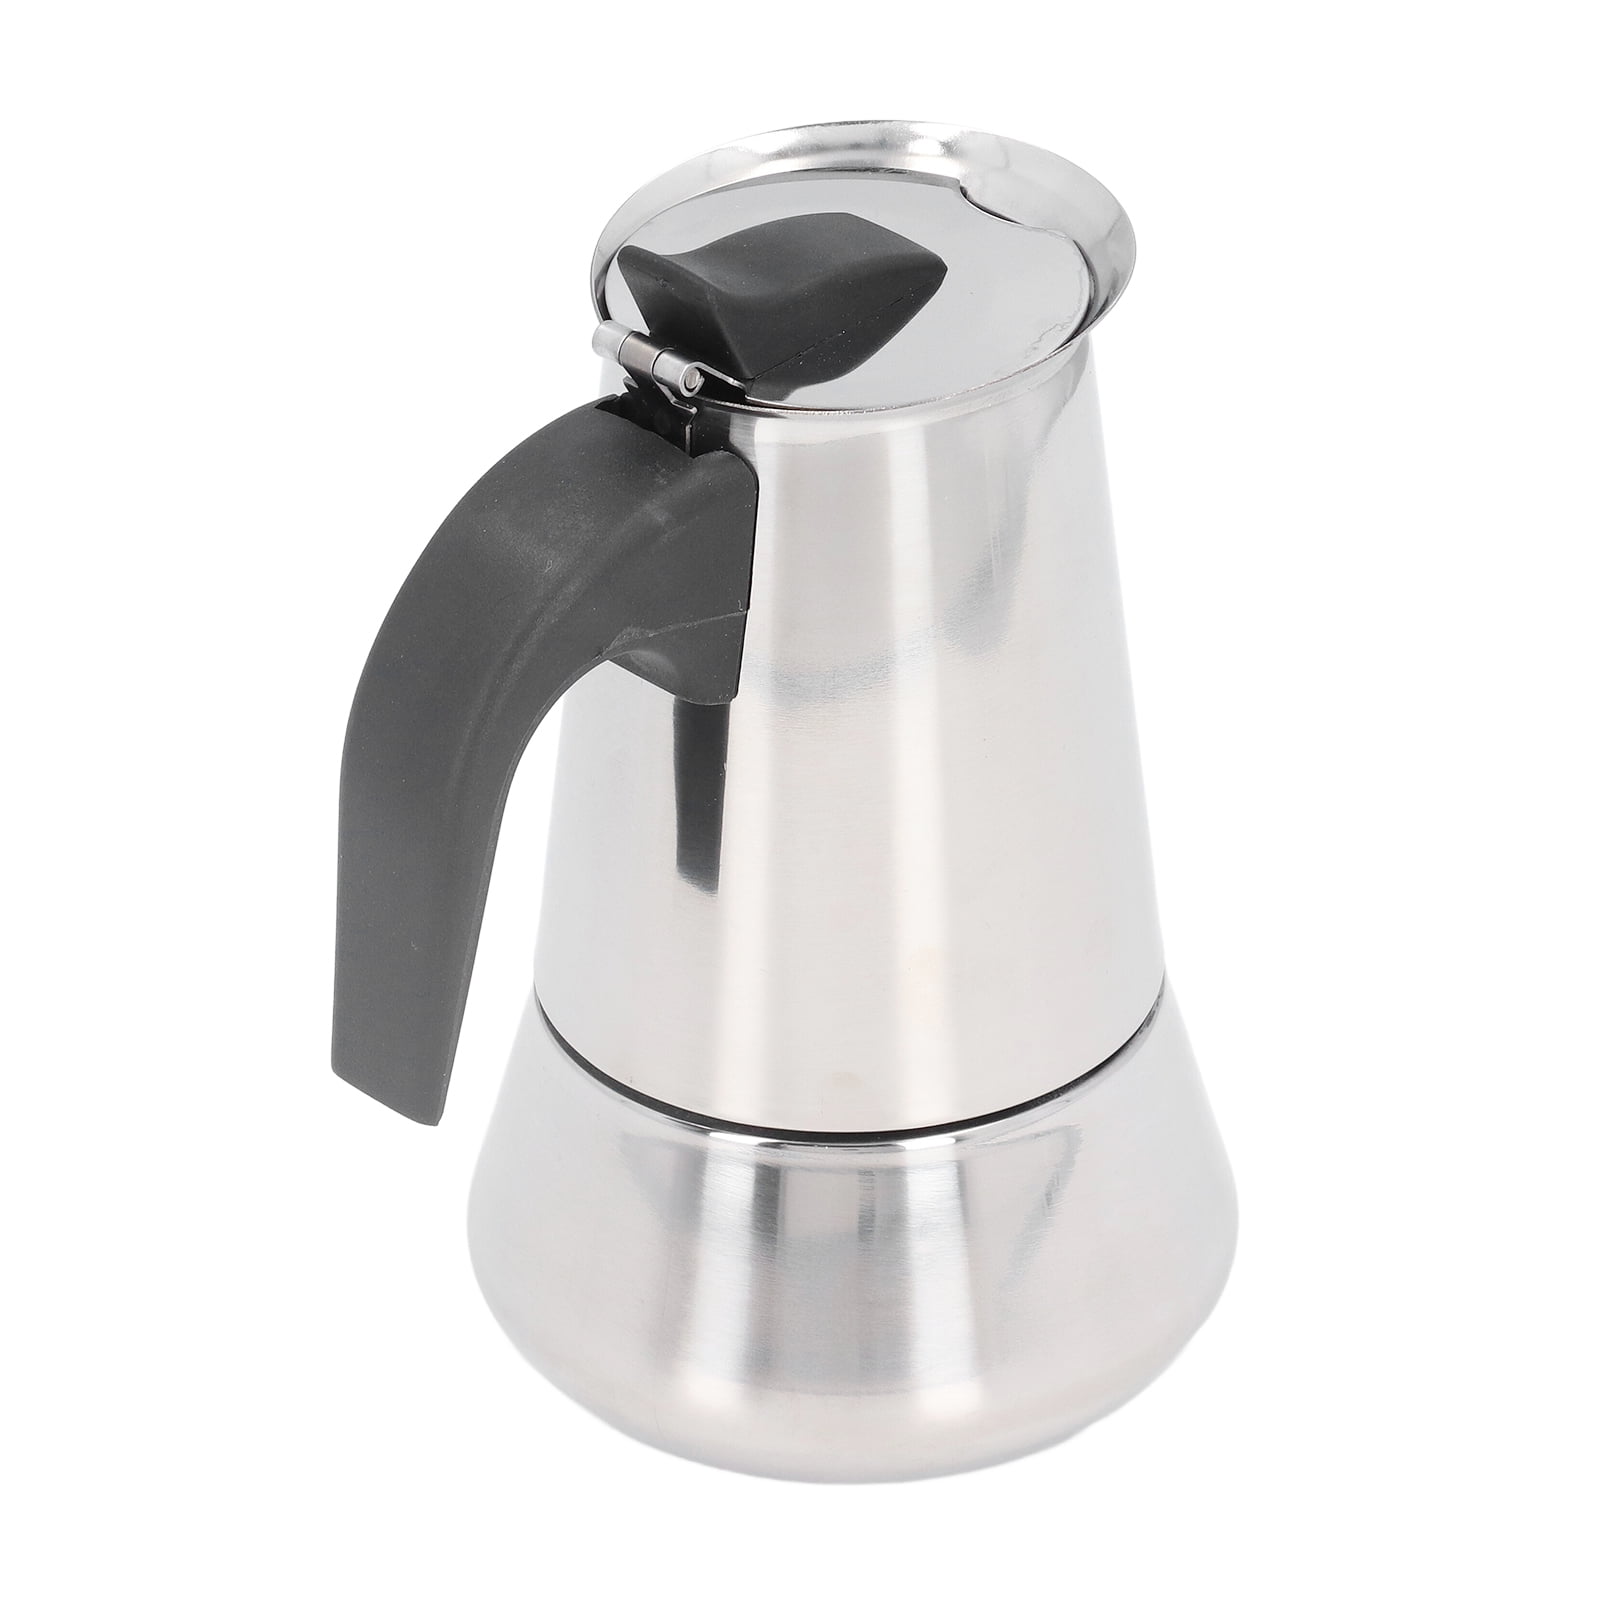 4 Cup Stainless Steel Moka Pot